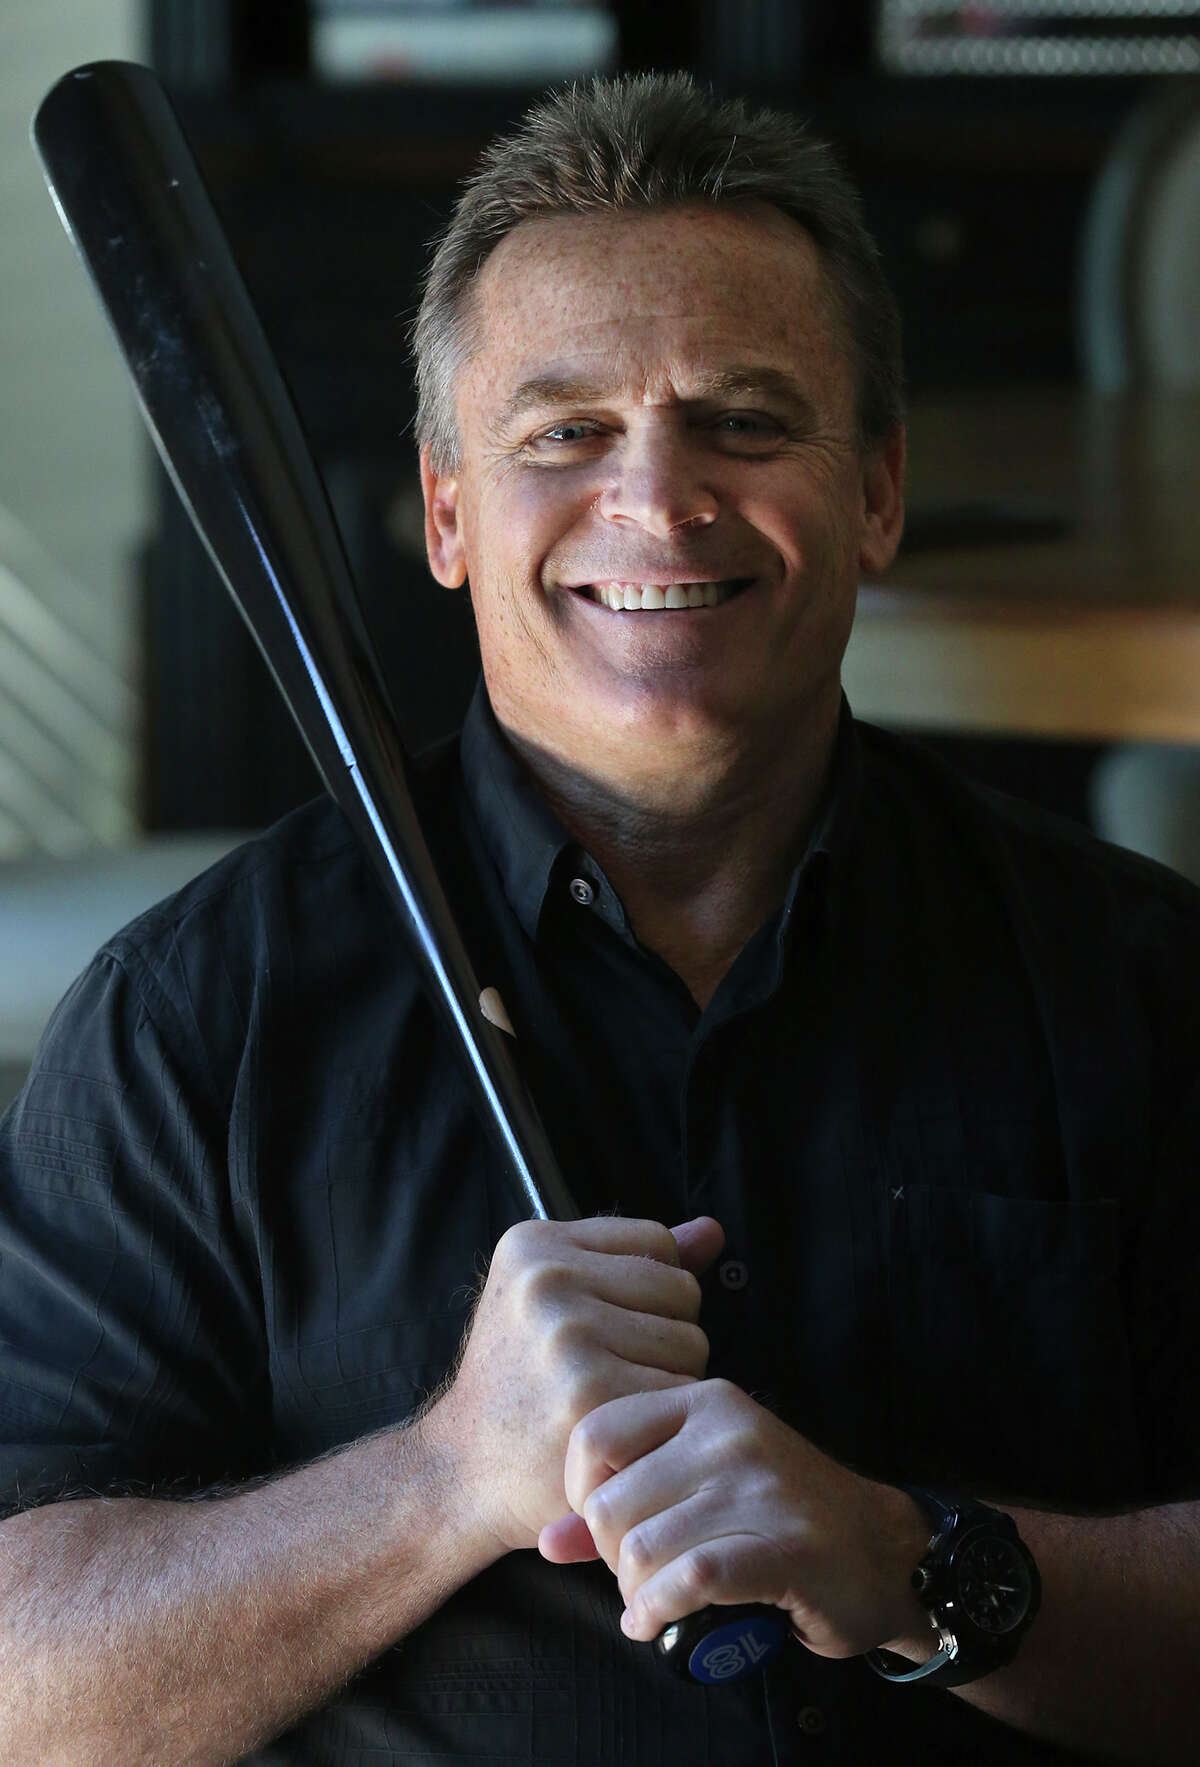 MacArthur graduate and former Missions skipper John Gibbons, the 2015 E-N Sportsman of the Year, led the Blue Jays to their first American League Championship Series since 1993.